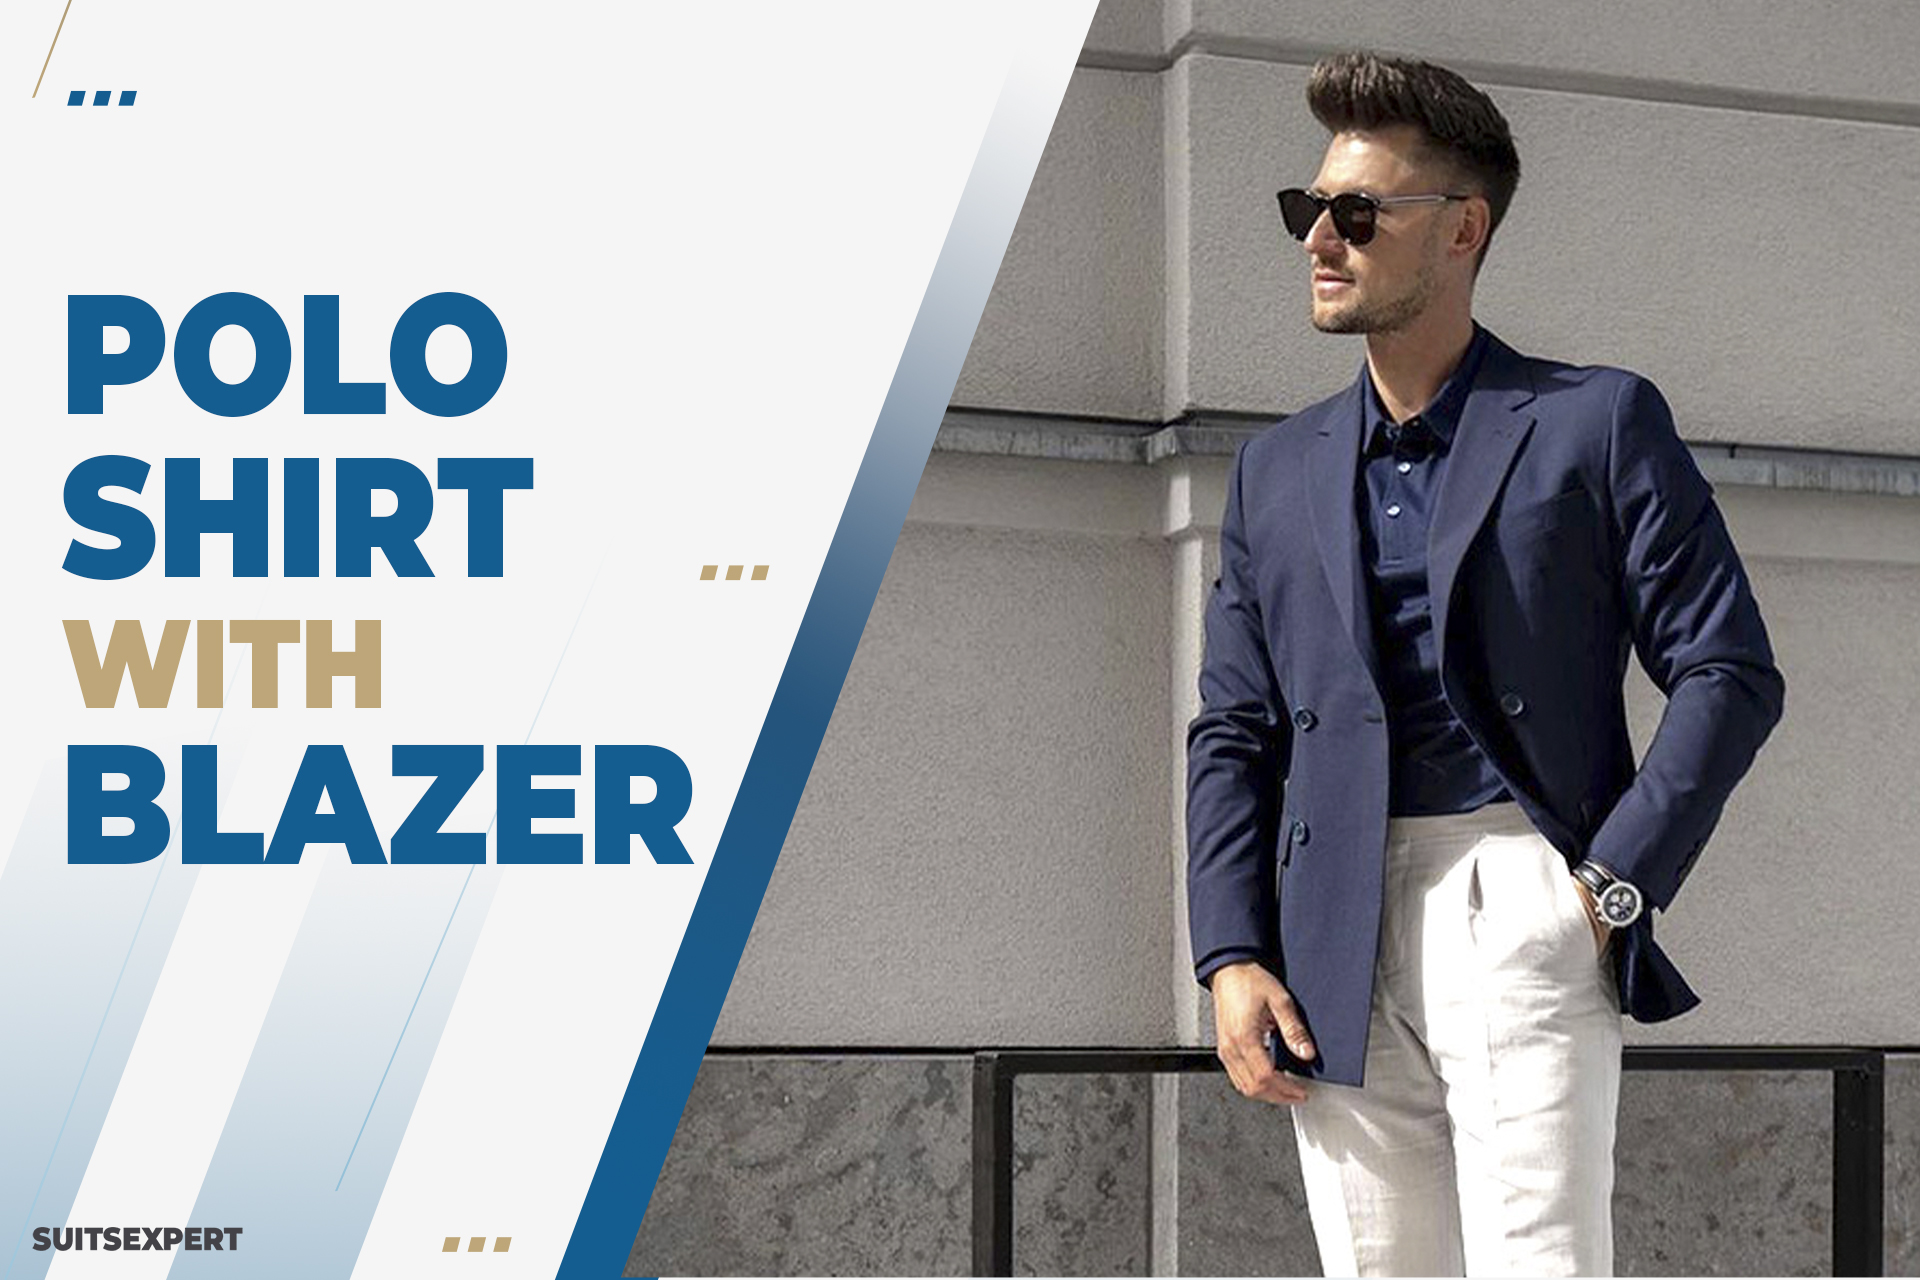 Can I wear a shirt without tucking it in with blazer? - Quora